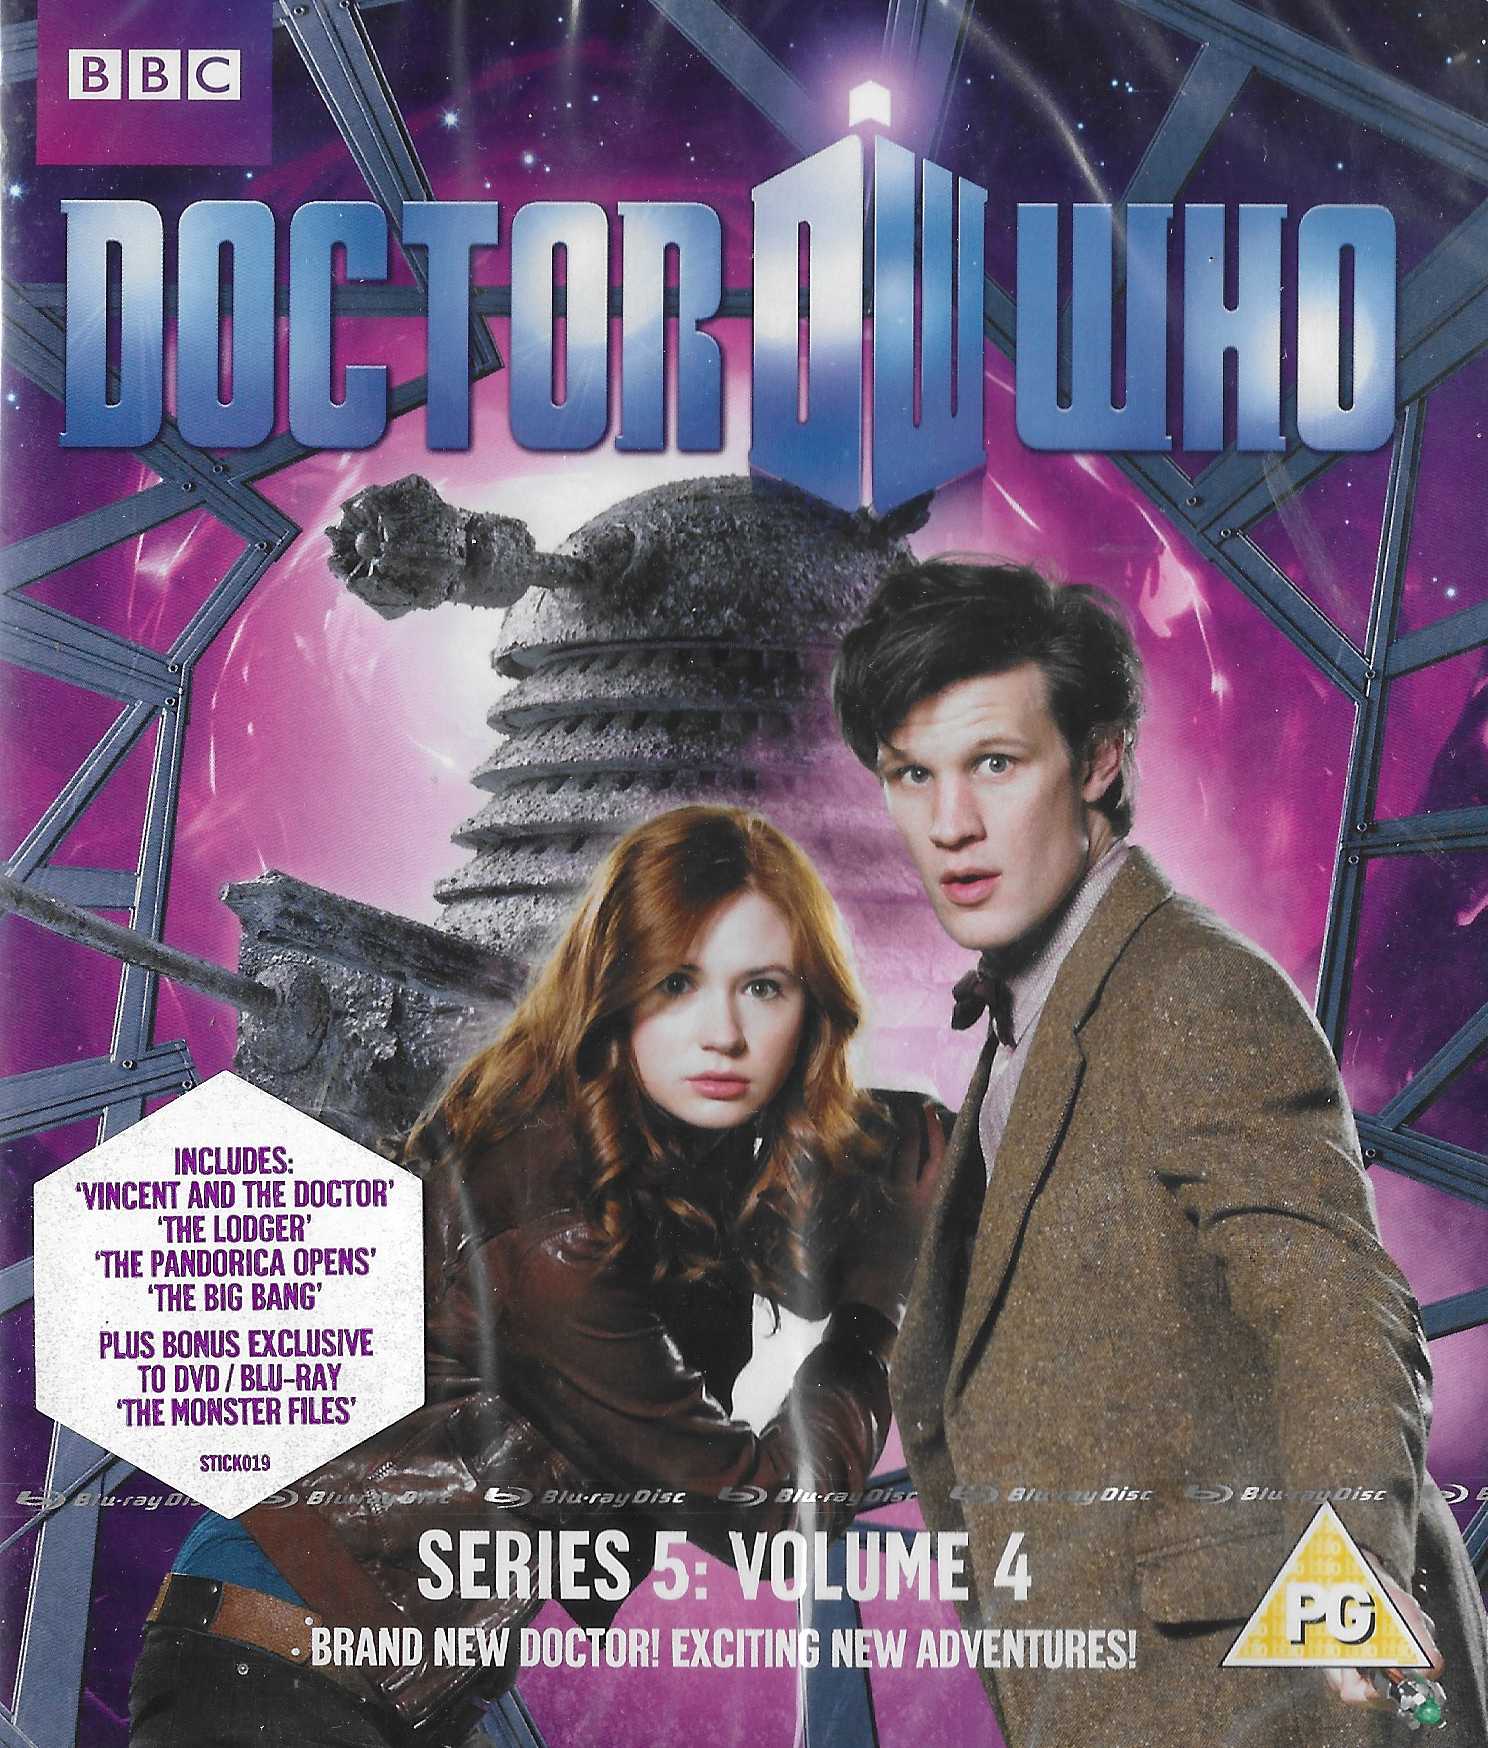 Picture of BBCBD 0085 Doctor Who - Series 5, volume 4 by artist Richard Curtis / Gareth Roberts / Steven Moffatt from the BBC records and Tapes library